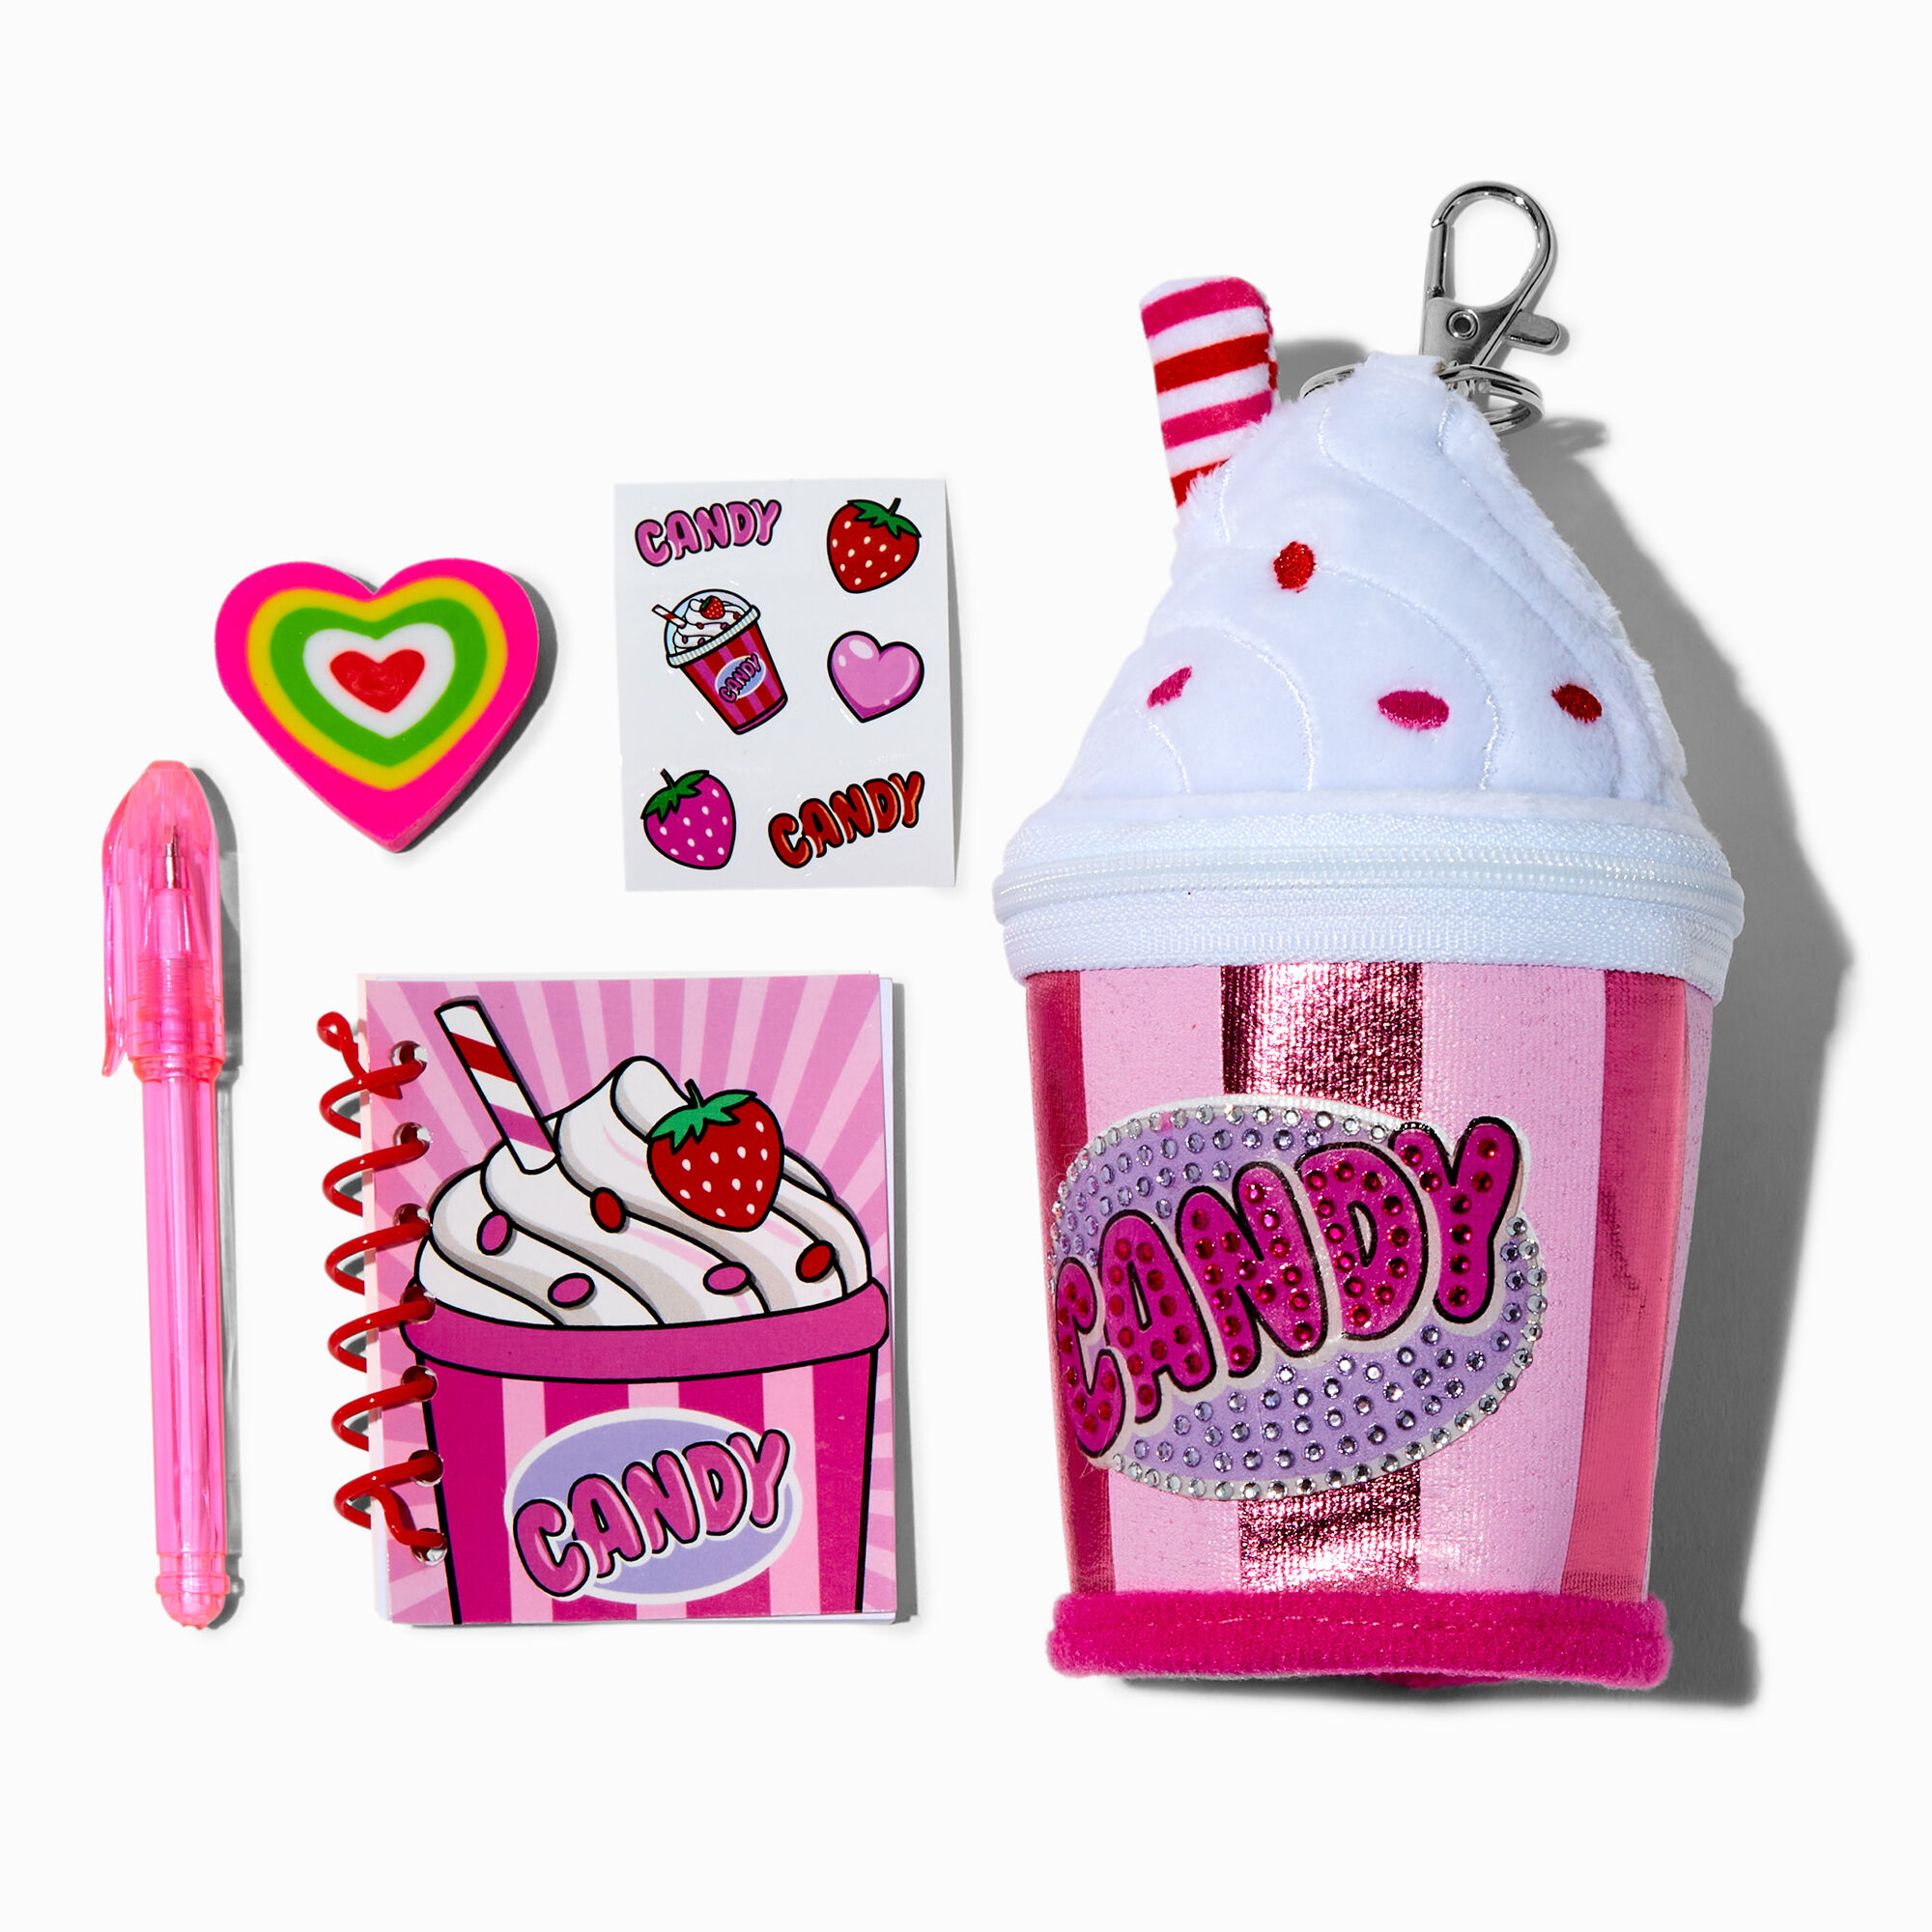 View Claires Candy Drink 4 Backpack Stationery Set information